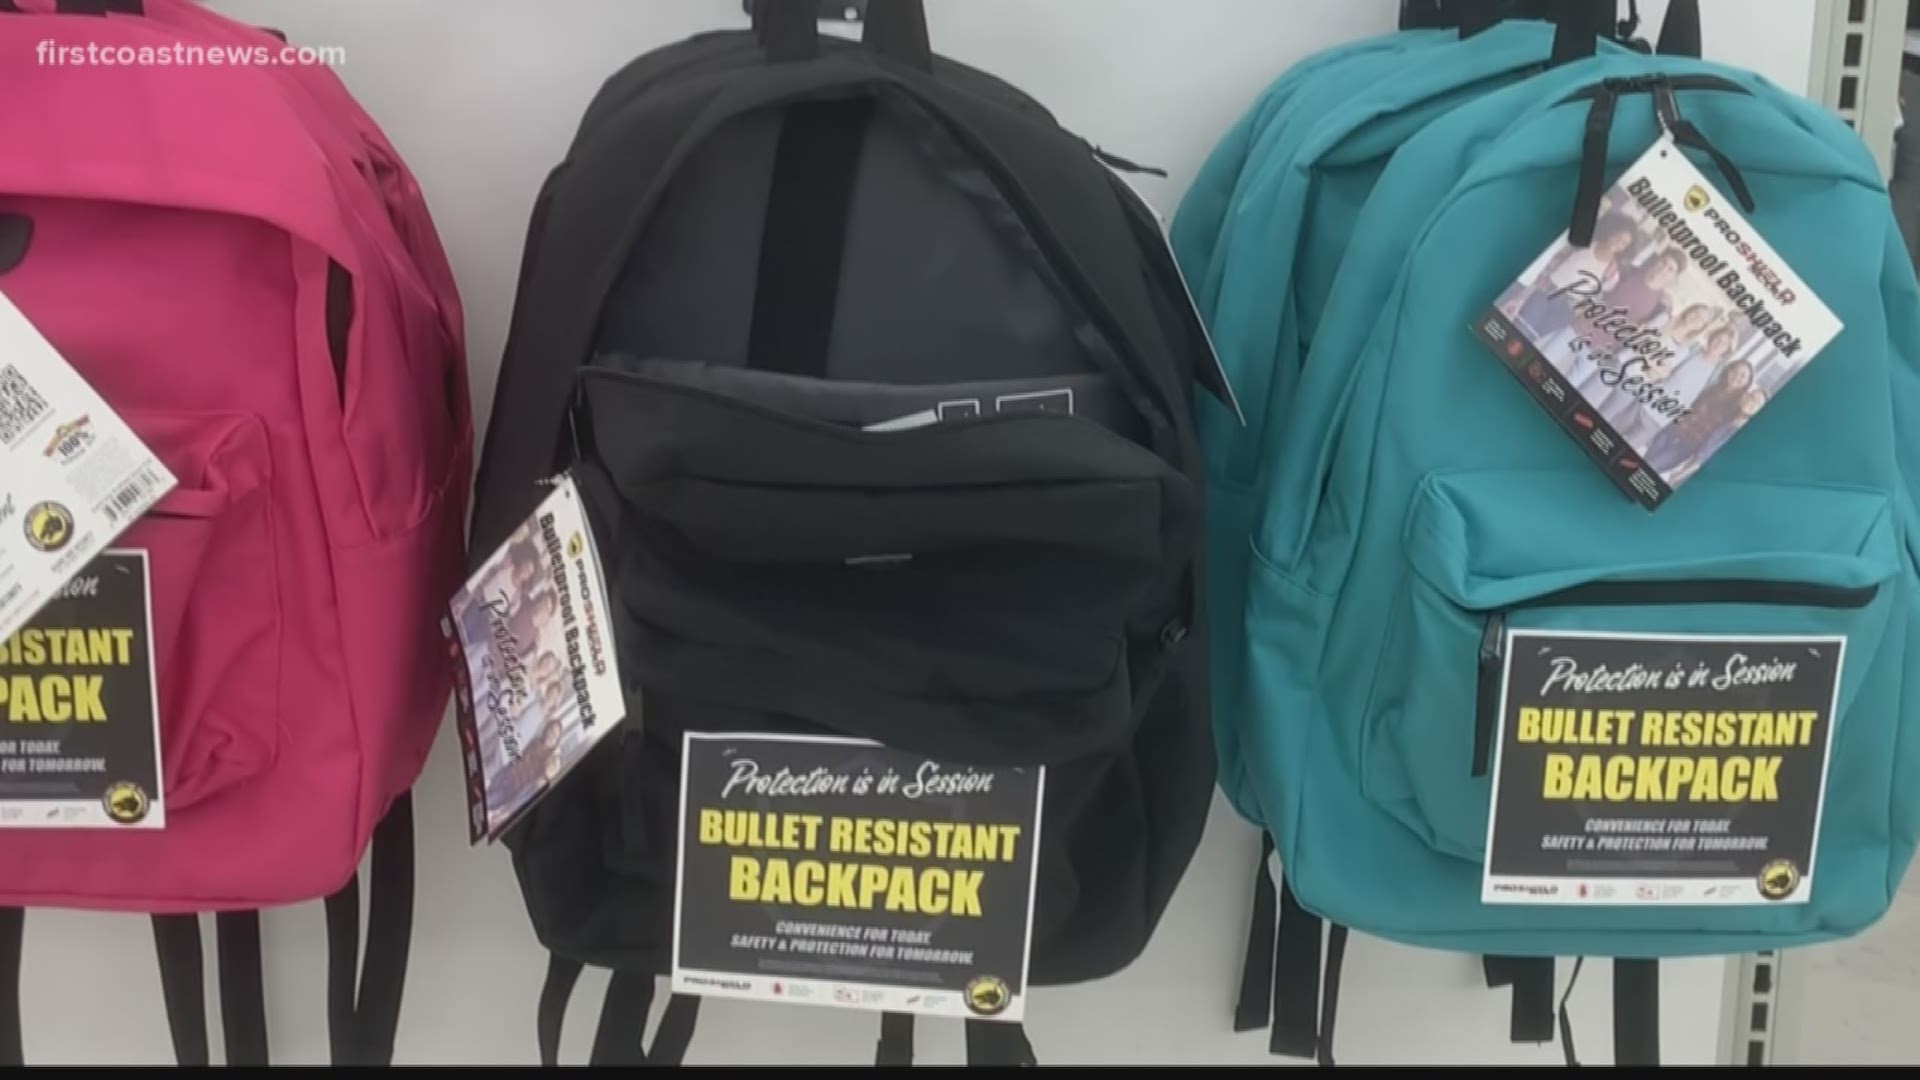 Since the shooting massacre at Sandy Hook, the backpacks have become a demand for parents during back to school shopping.